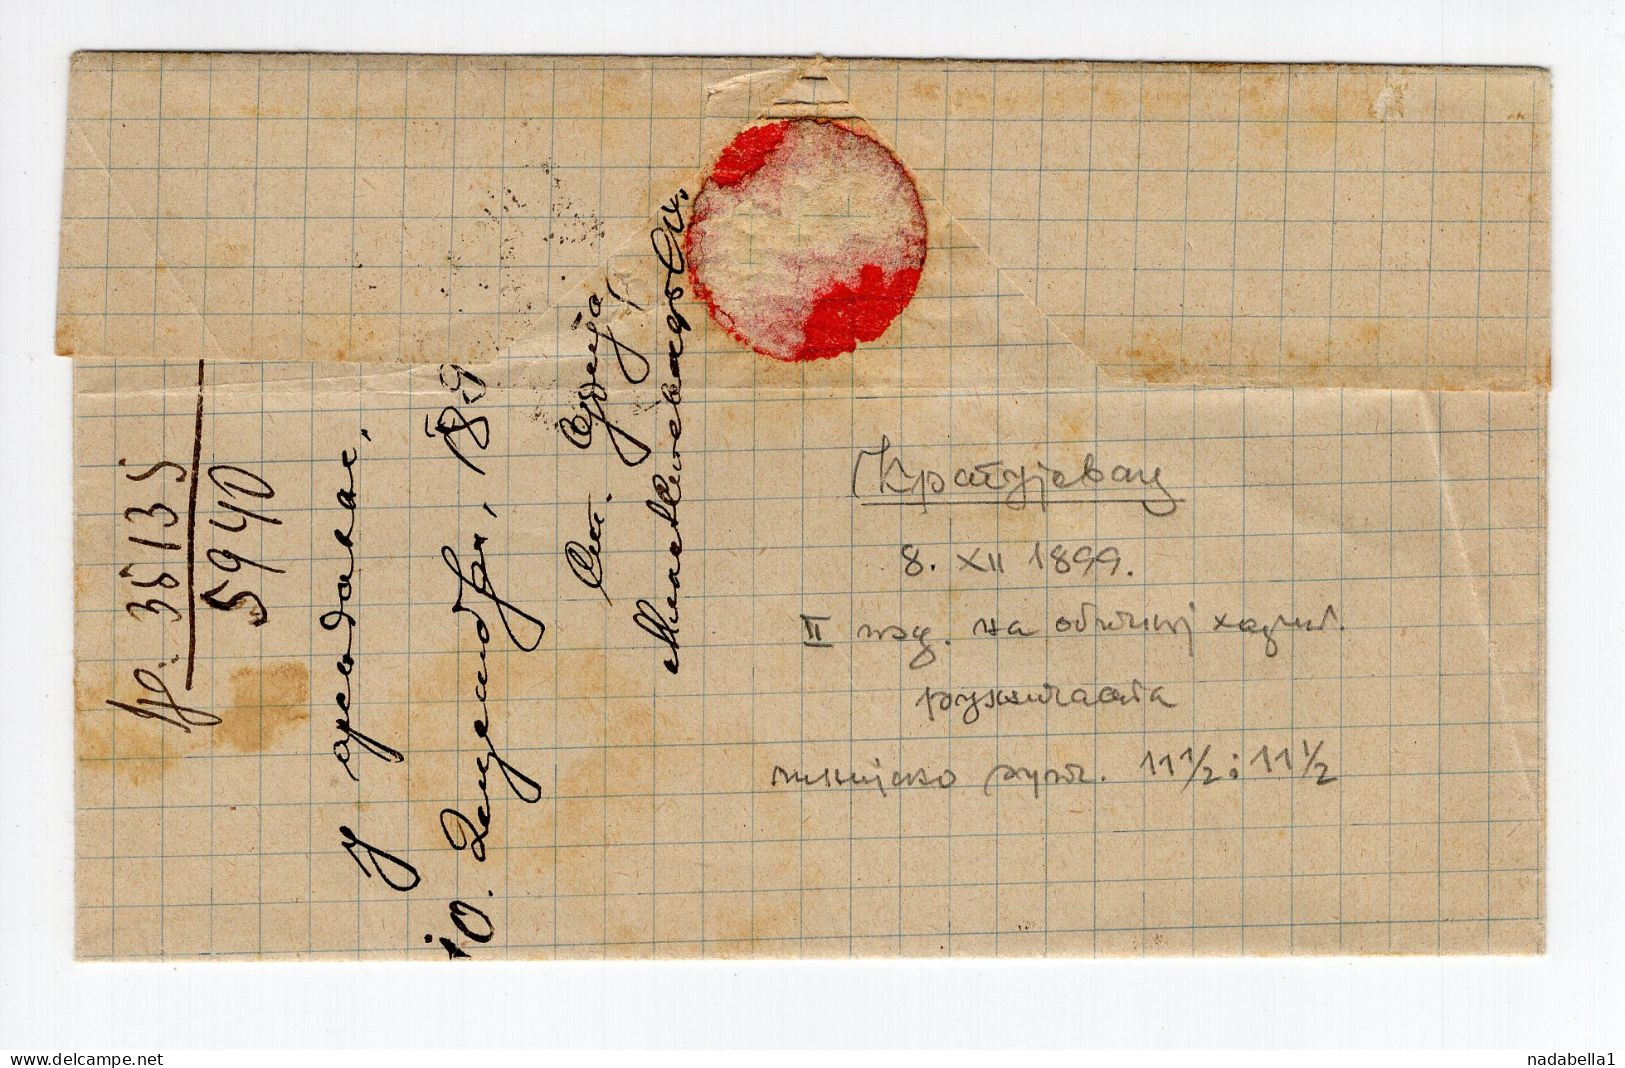 1899. SERBIA,KRAGUJEVAC,LOCAL RATE 10 PARA FOR DOUBLE WEIGHT WE BELIEVE,COVER,INSIDE LETTER MISSING - Serbia